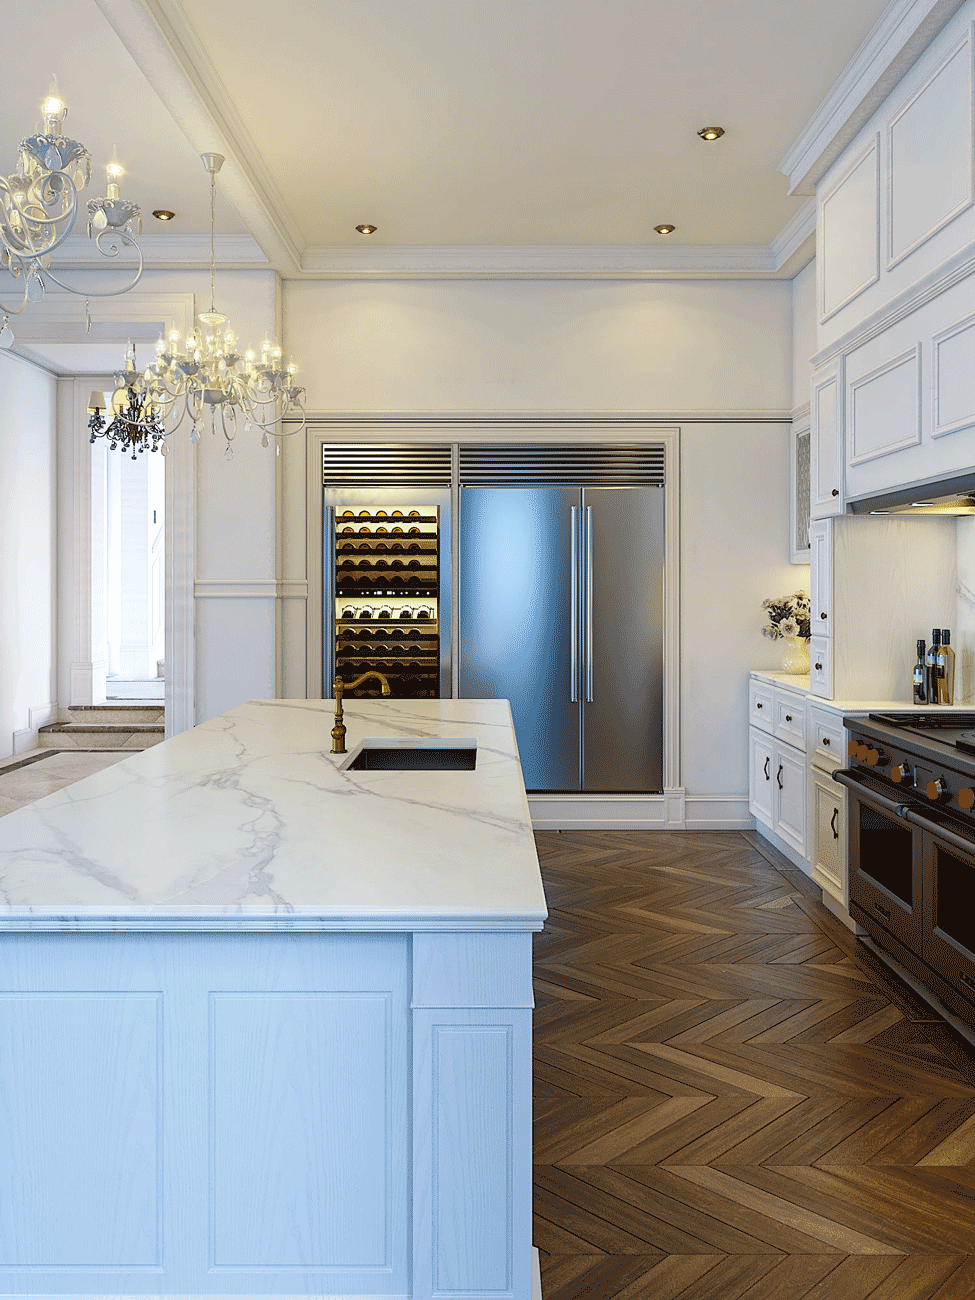 A classic French Provincial style kitchen with herringbone timber flooring, marble benchtops, and a large island bench with a built-in sink and breakfast bar, wine fridge and double under-bench oven